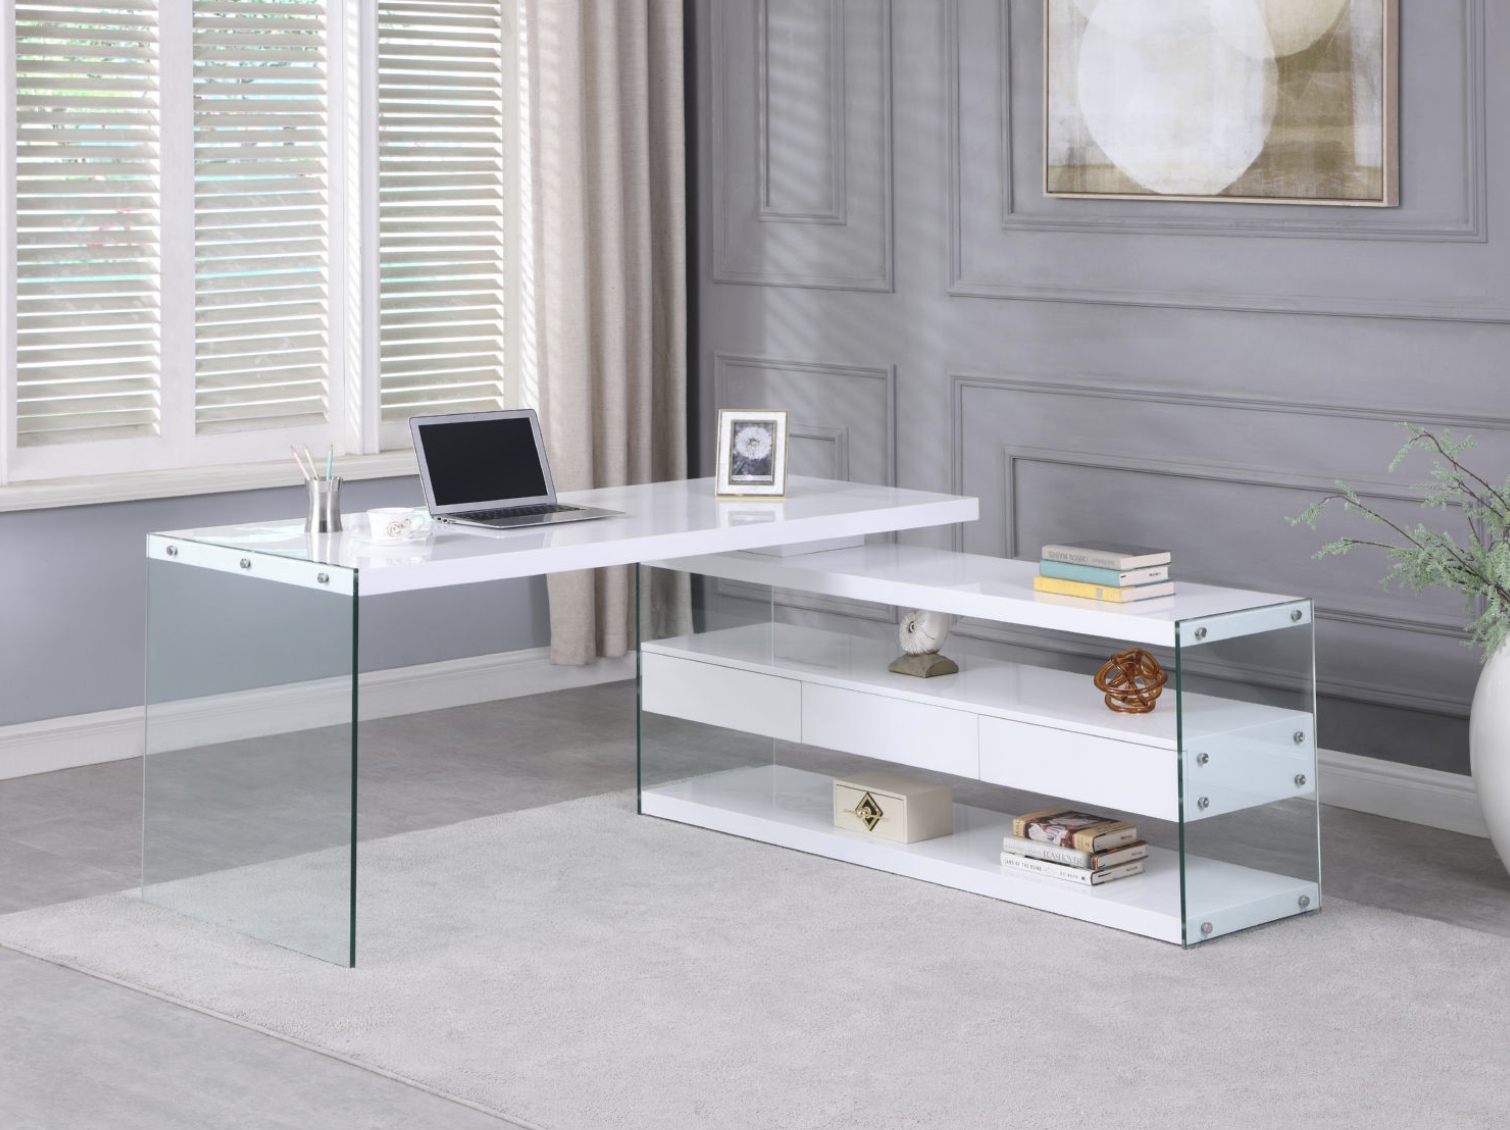 Exquisite High Gloss White Office Desk with Glass Shelves